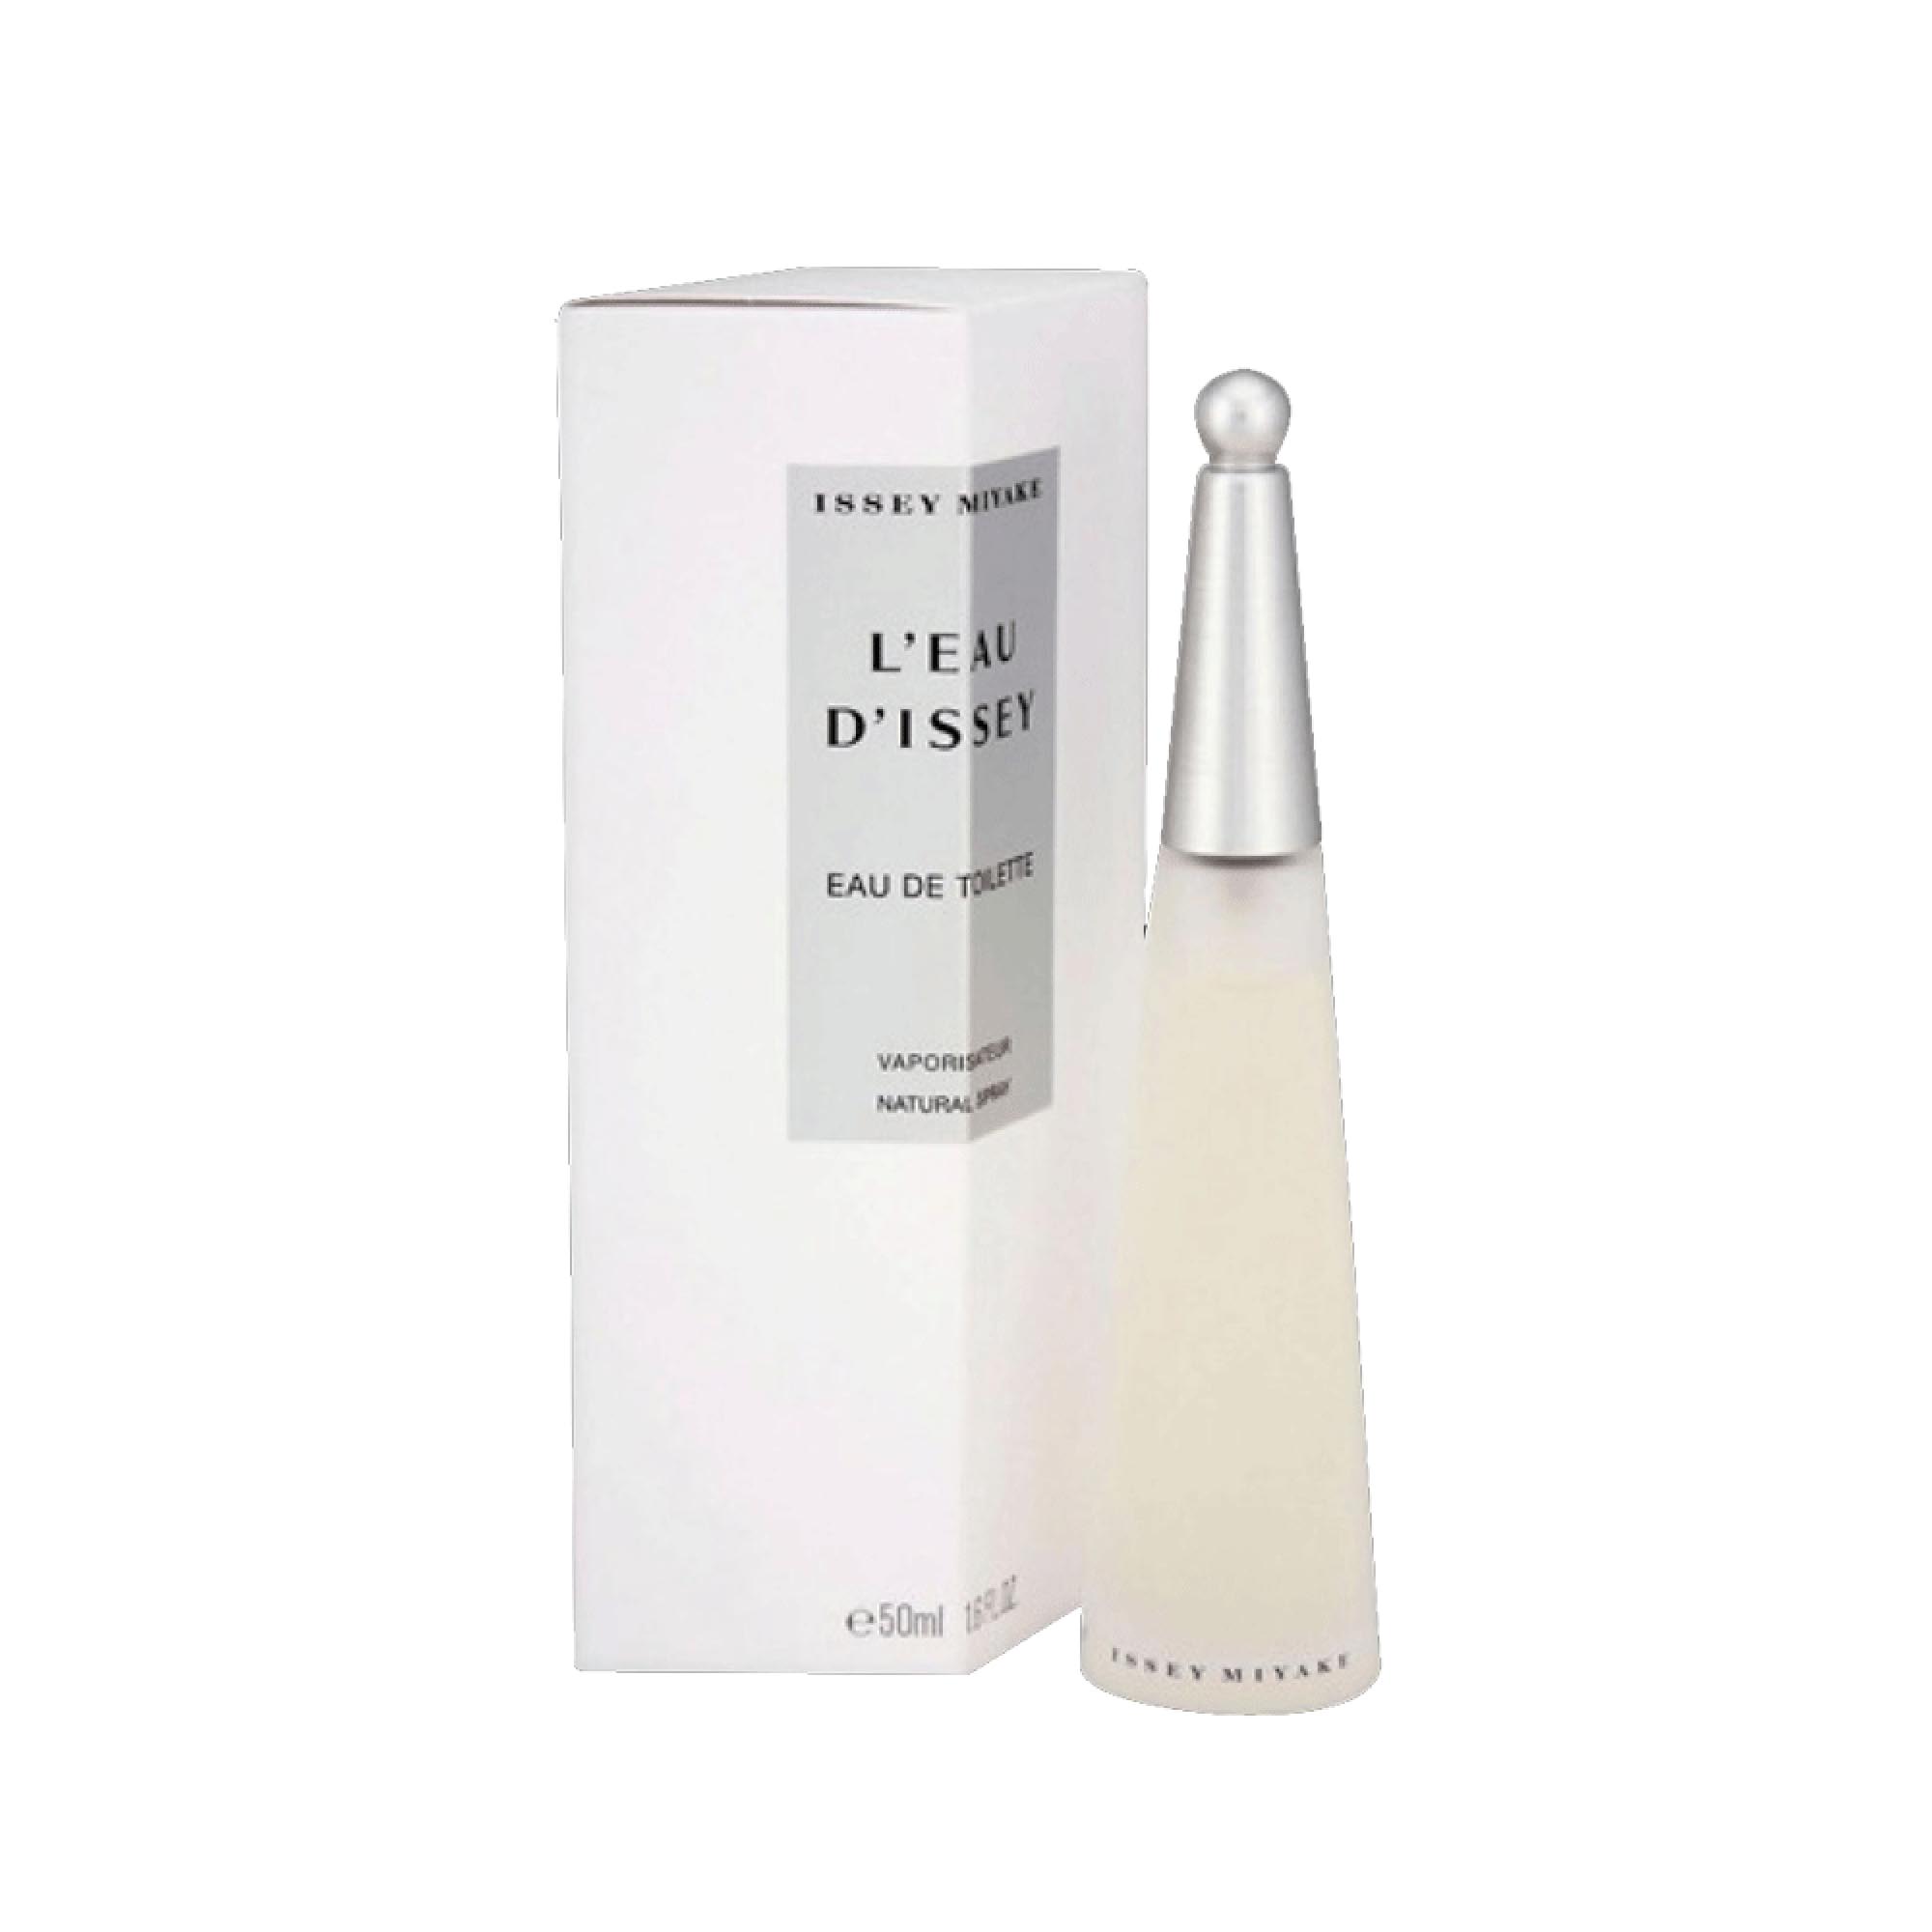 L’EAU D’ISSEY / Issey Miyake